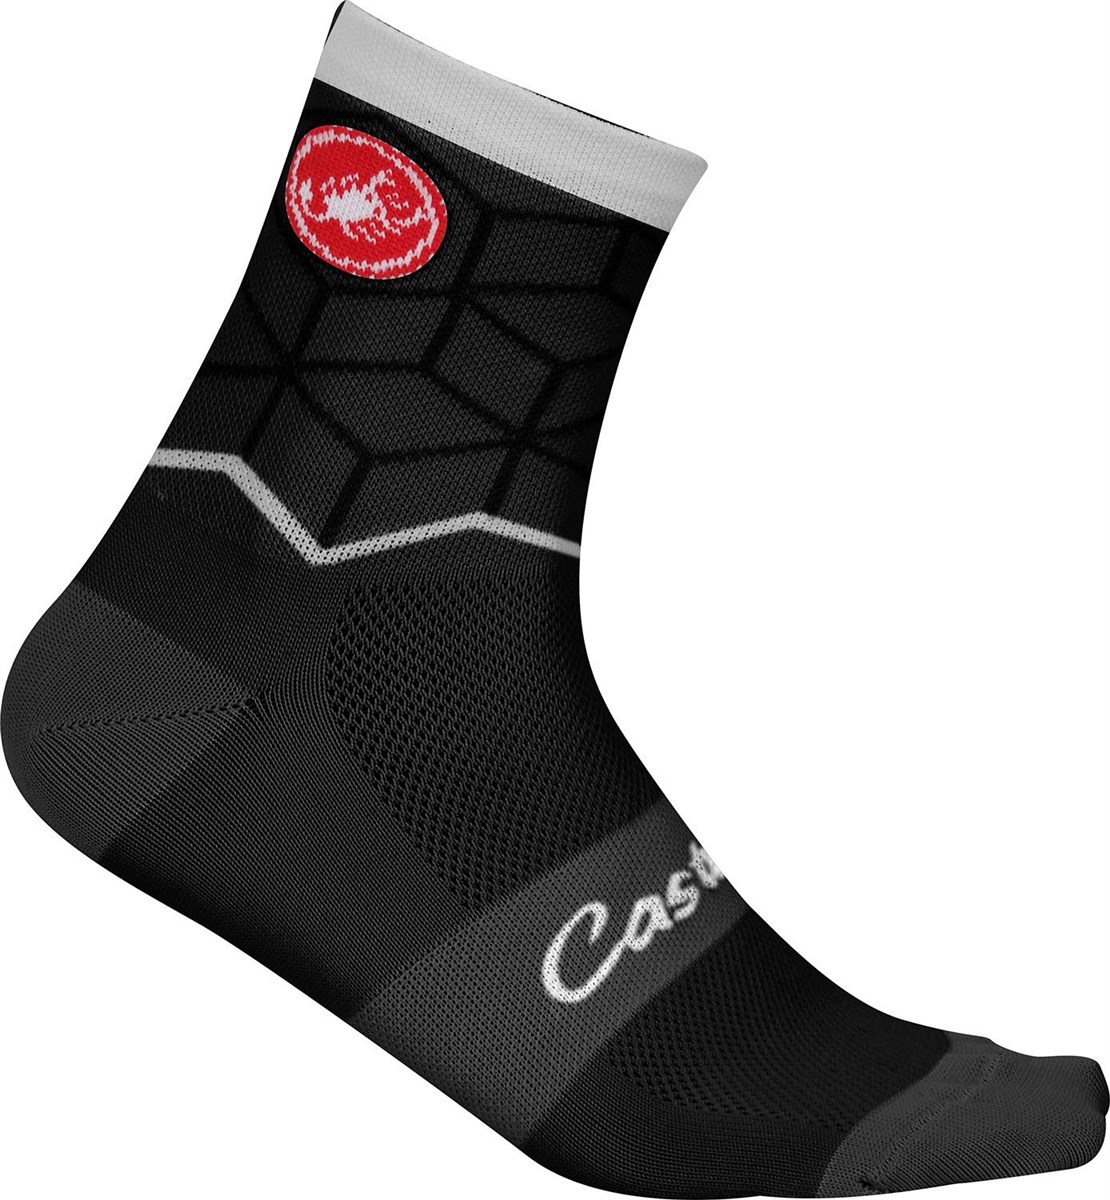 Castelli Vertice Cycling Socks product image